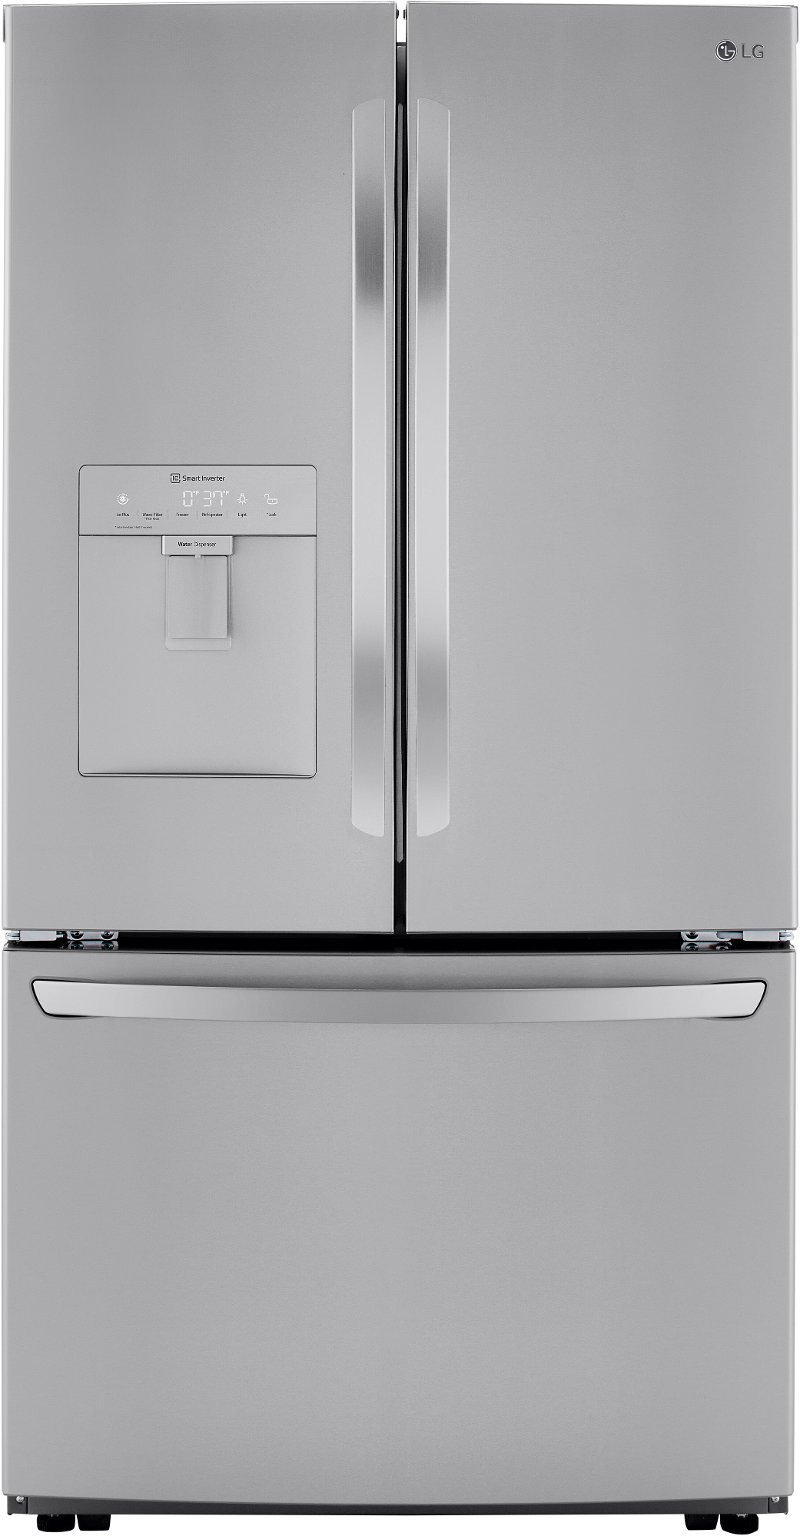 19+ Lg french door refrigerator defrost cycle ideas